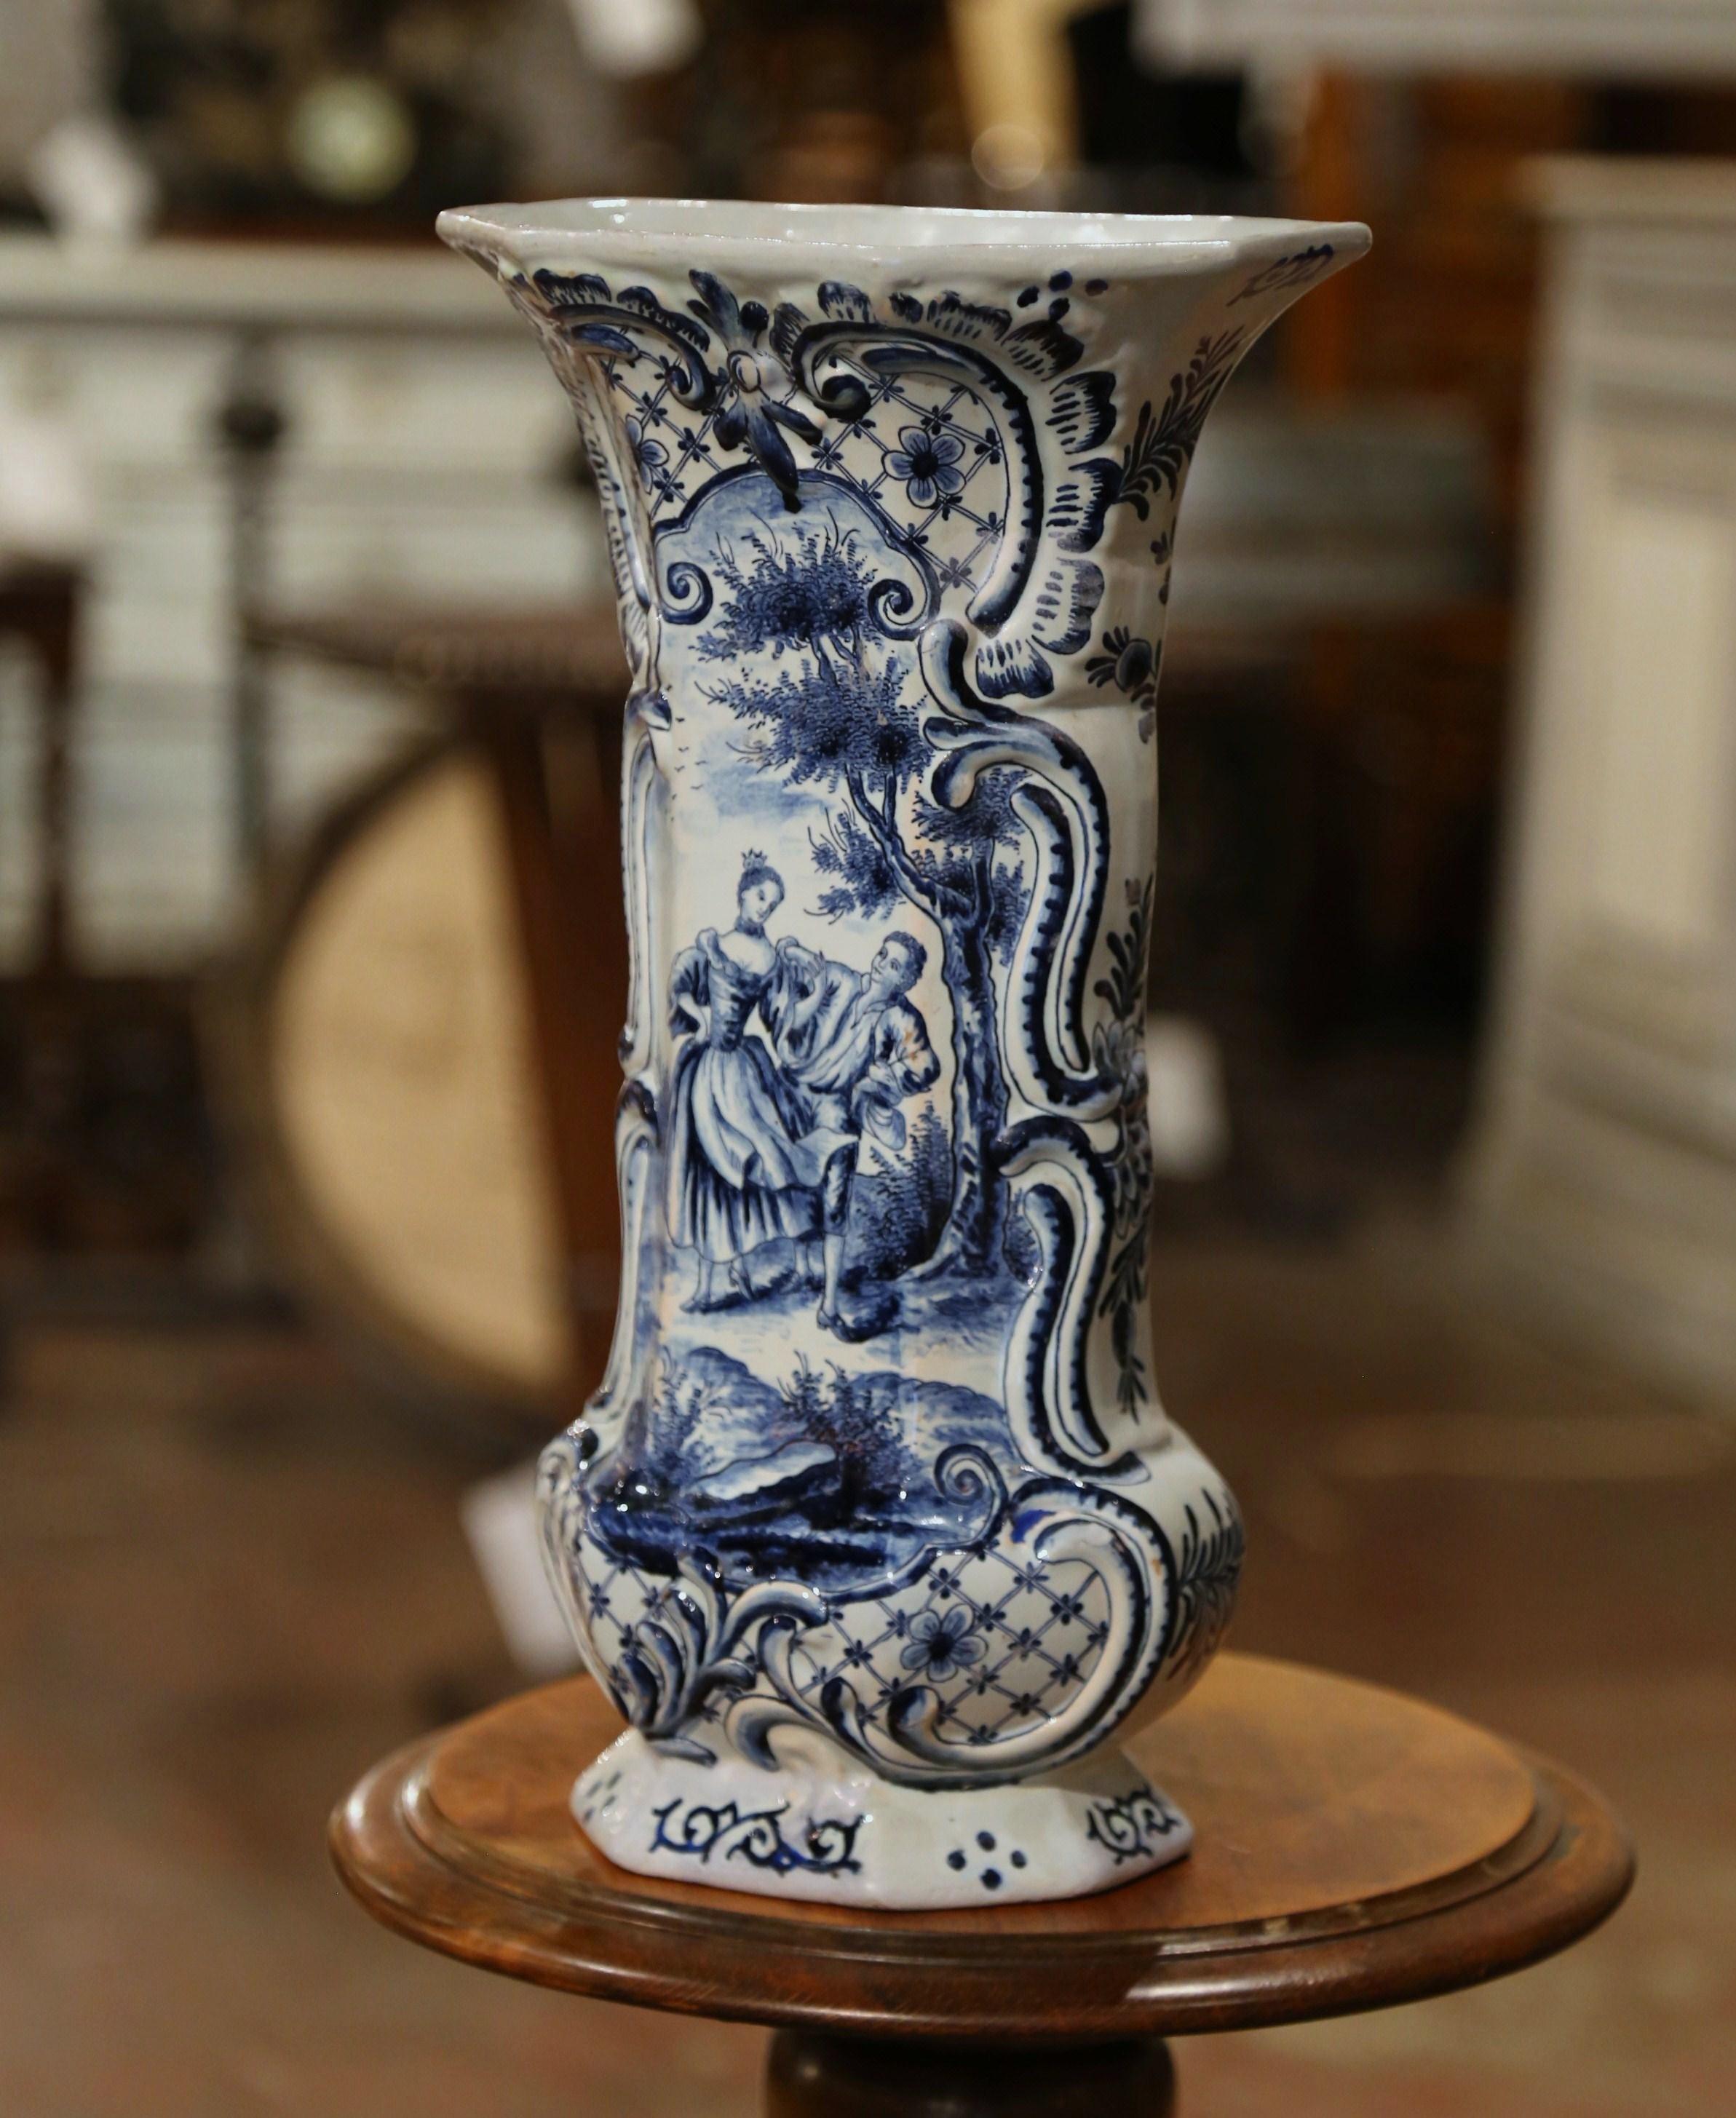 This important antique vase was crafted in France, circa 1780. Octagonal in shape with gadrooned body style and a tall neck, the elegant potiche features a hand painted medallion depicting an outdoor courting scene in the traditional blue and white